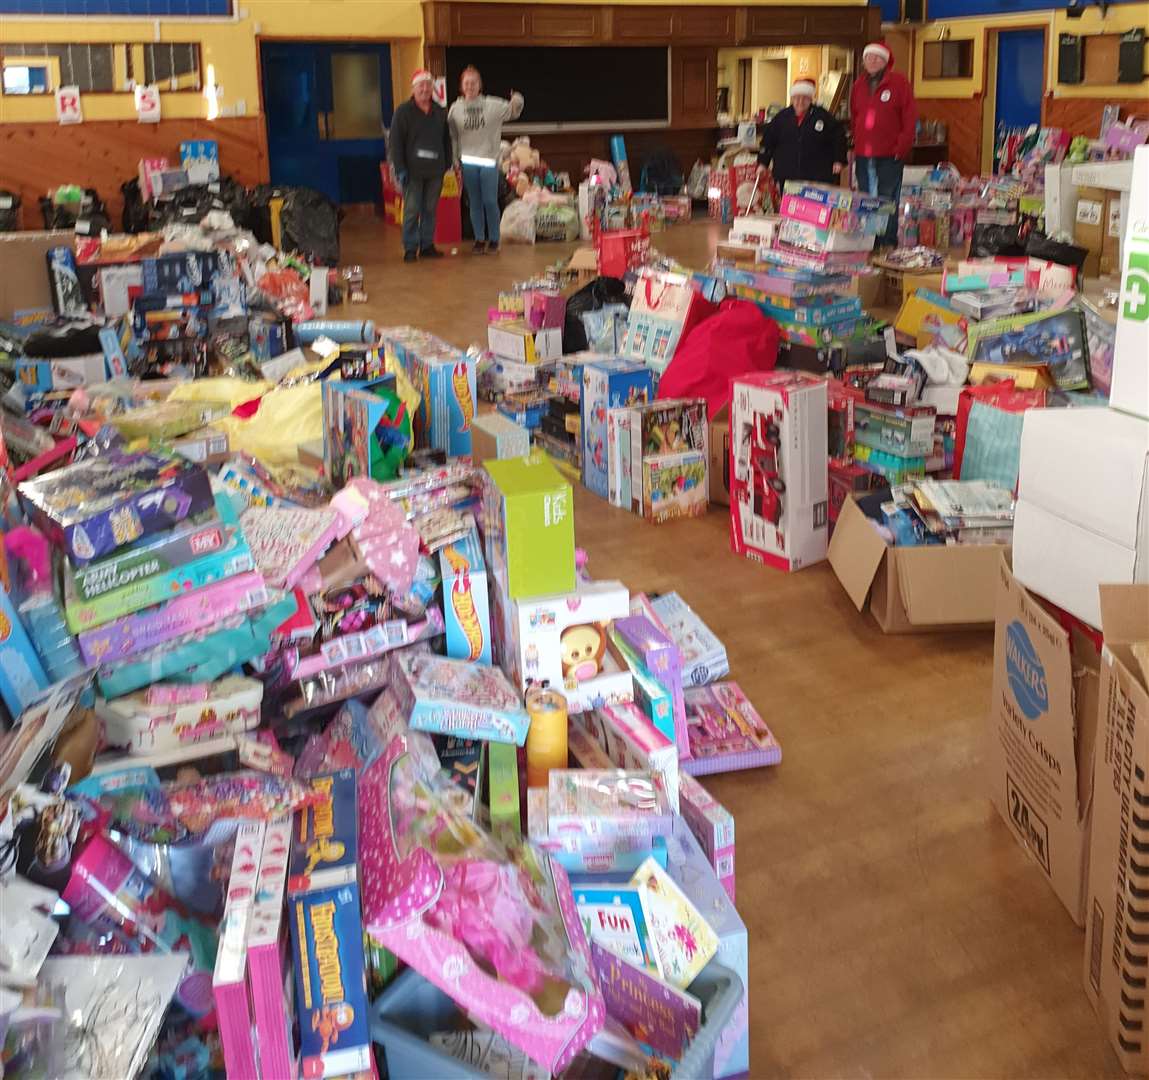 Some of the many gifts collected by Caithness FM in its toy appeal last year.